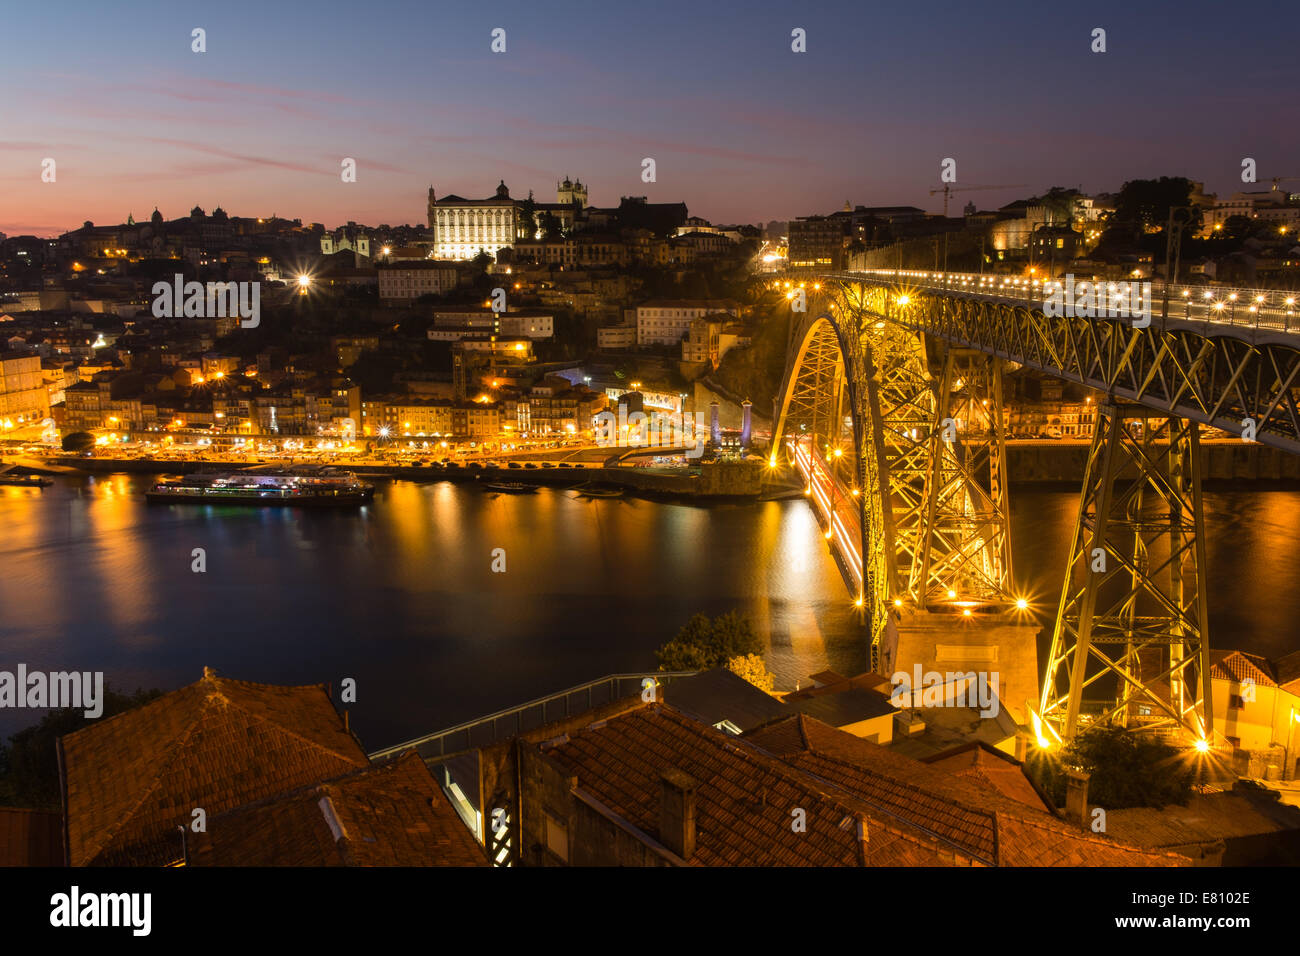 Sunset over the Ribeira district with the illuminated Luiz I bridge in foreground, Oporto, Portugal Stock Photo